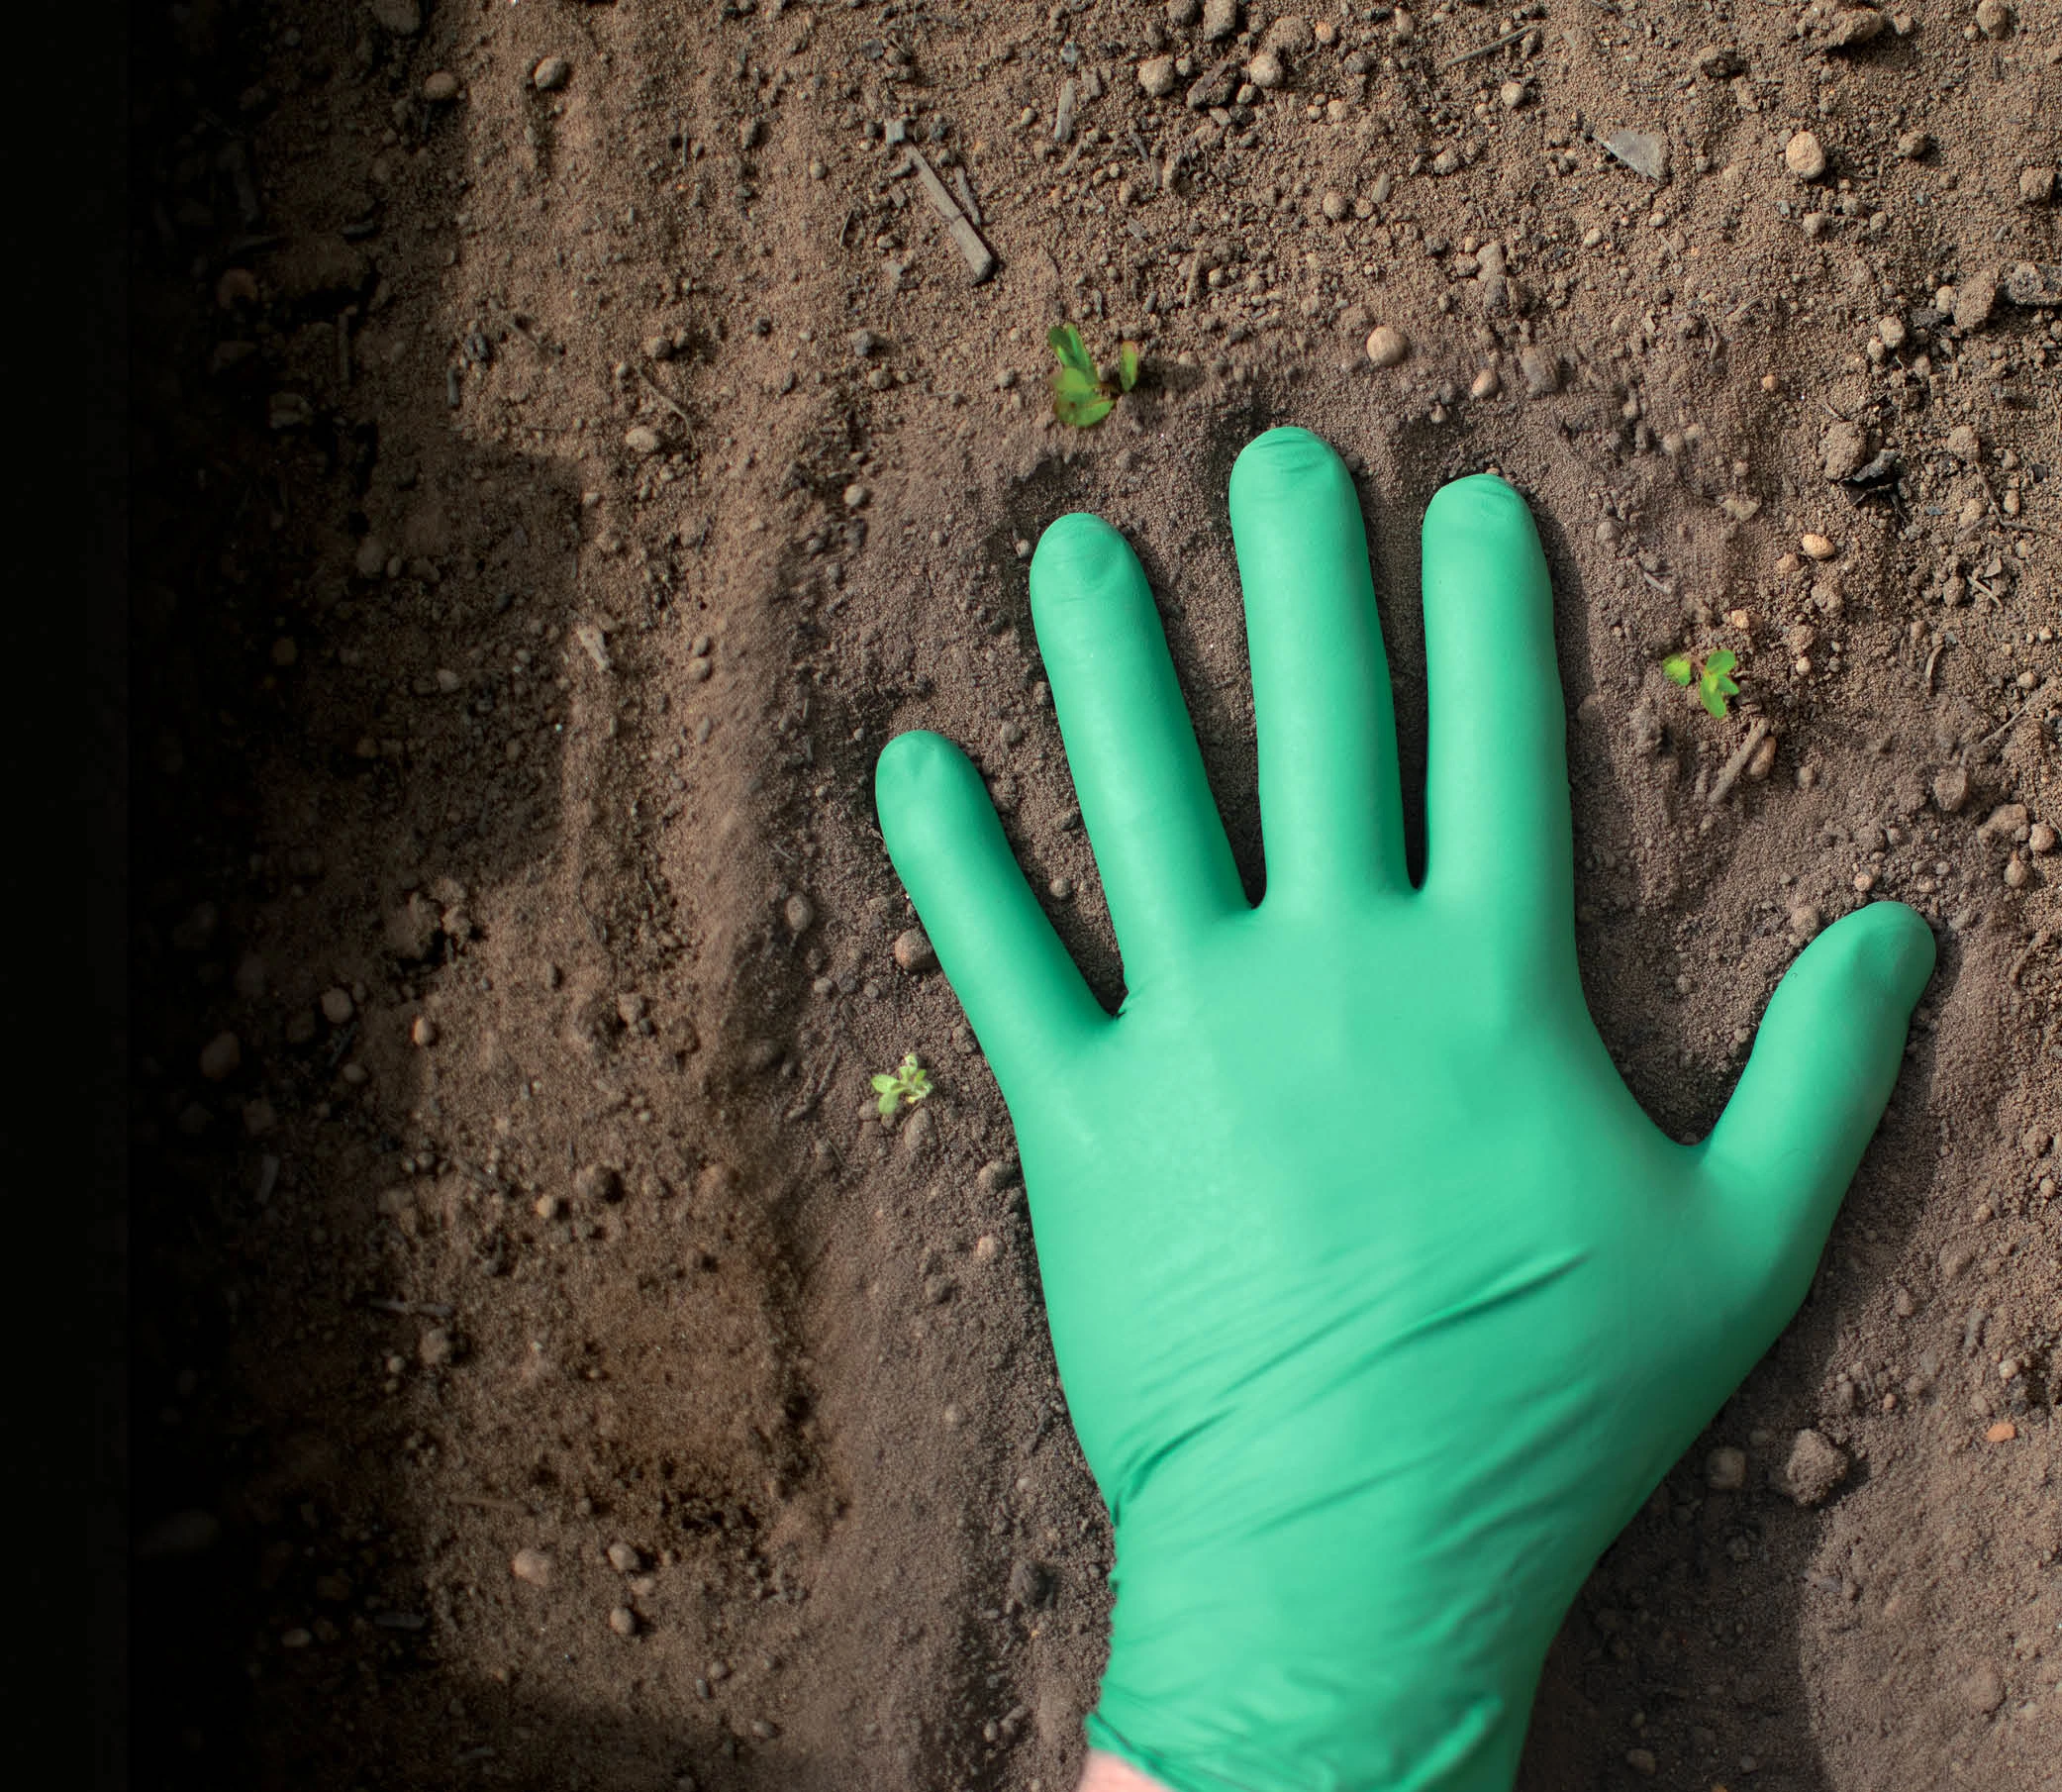 Sustainable Green Single-Use Nitrile Gloves Impressing into Dirt